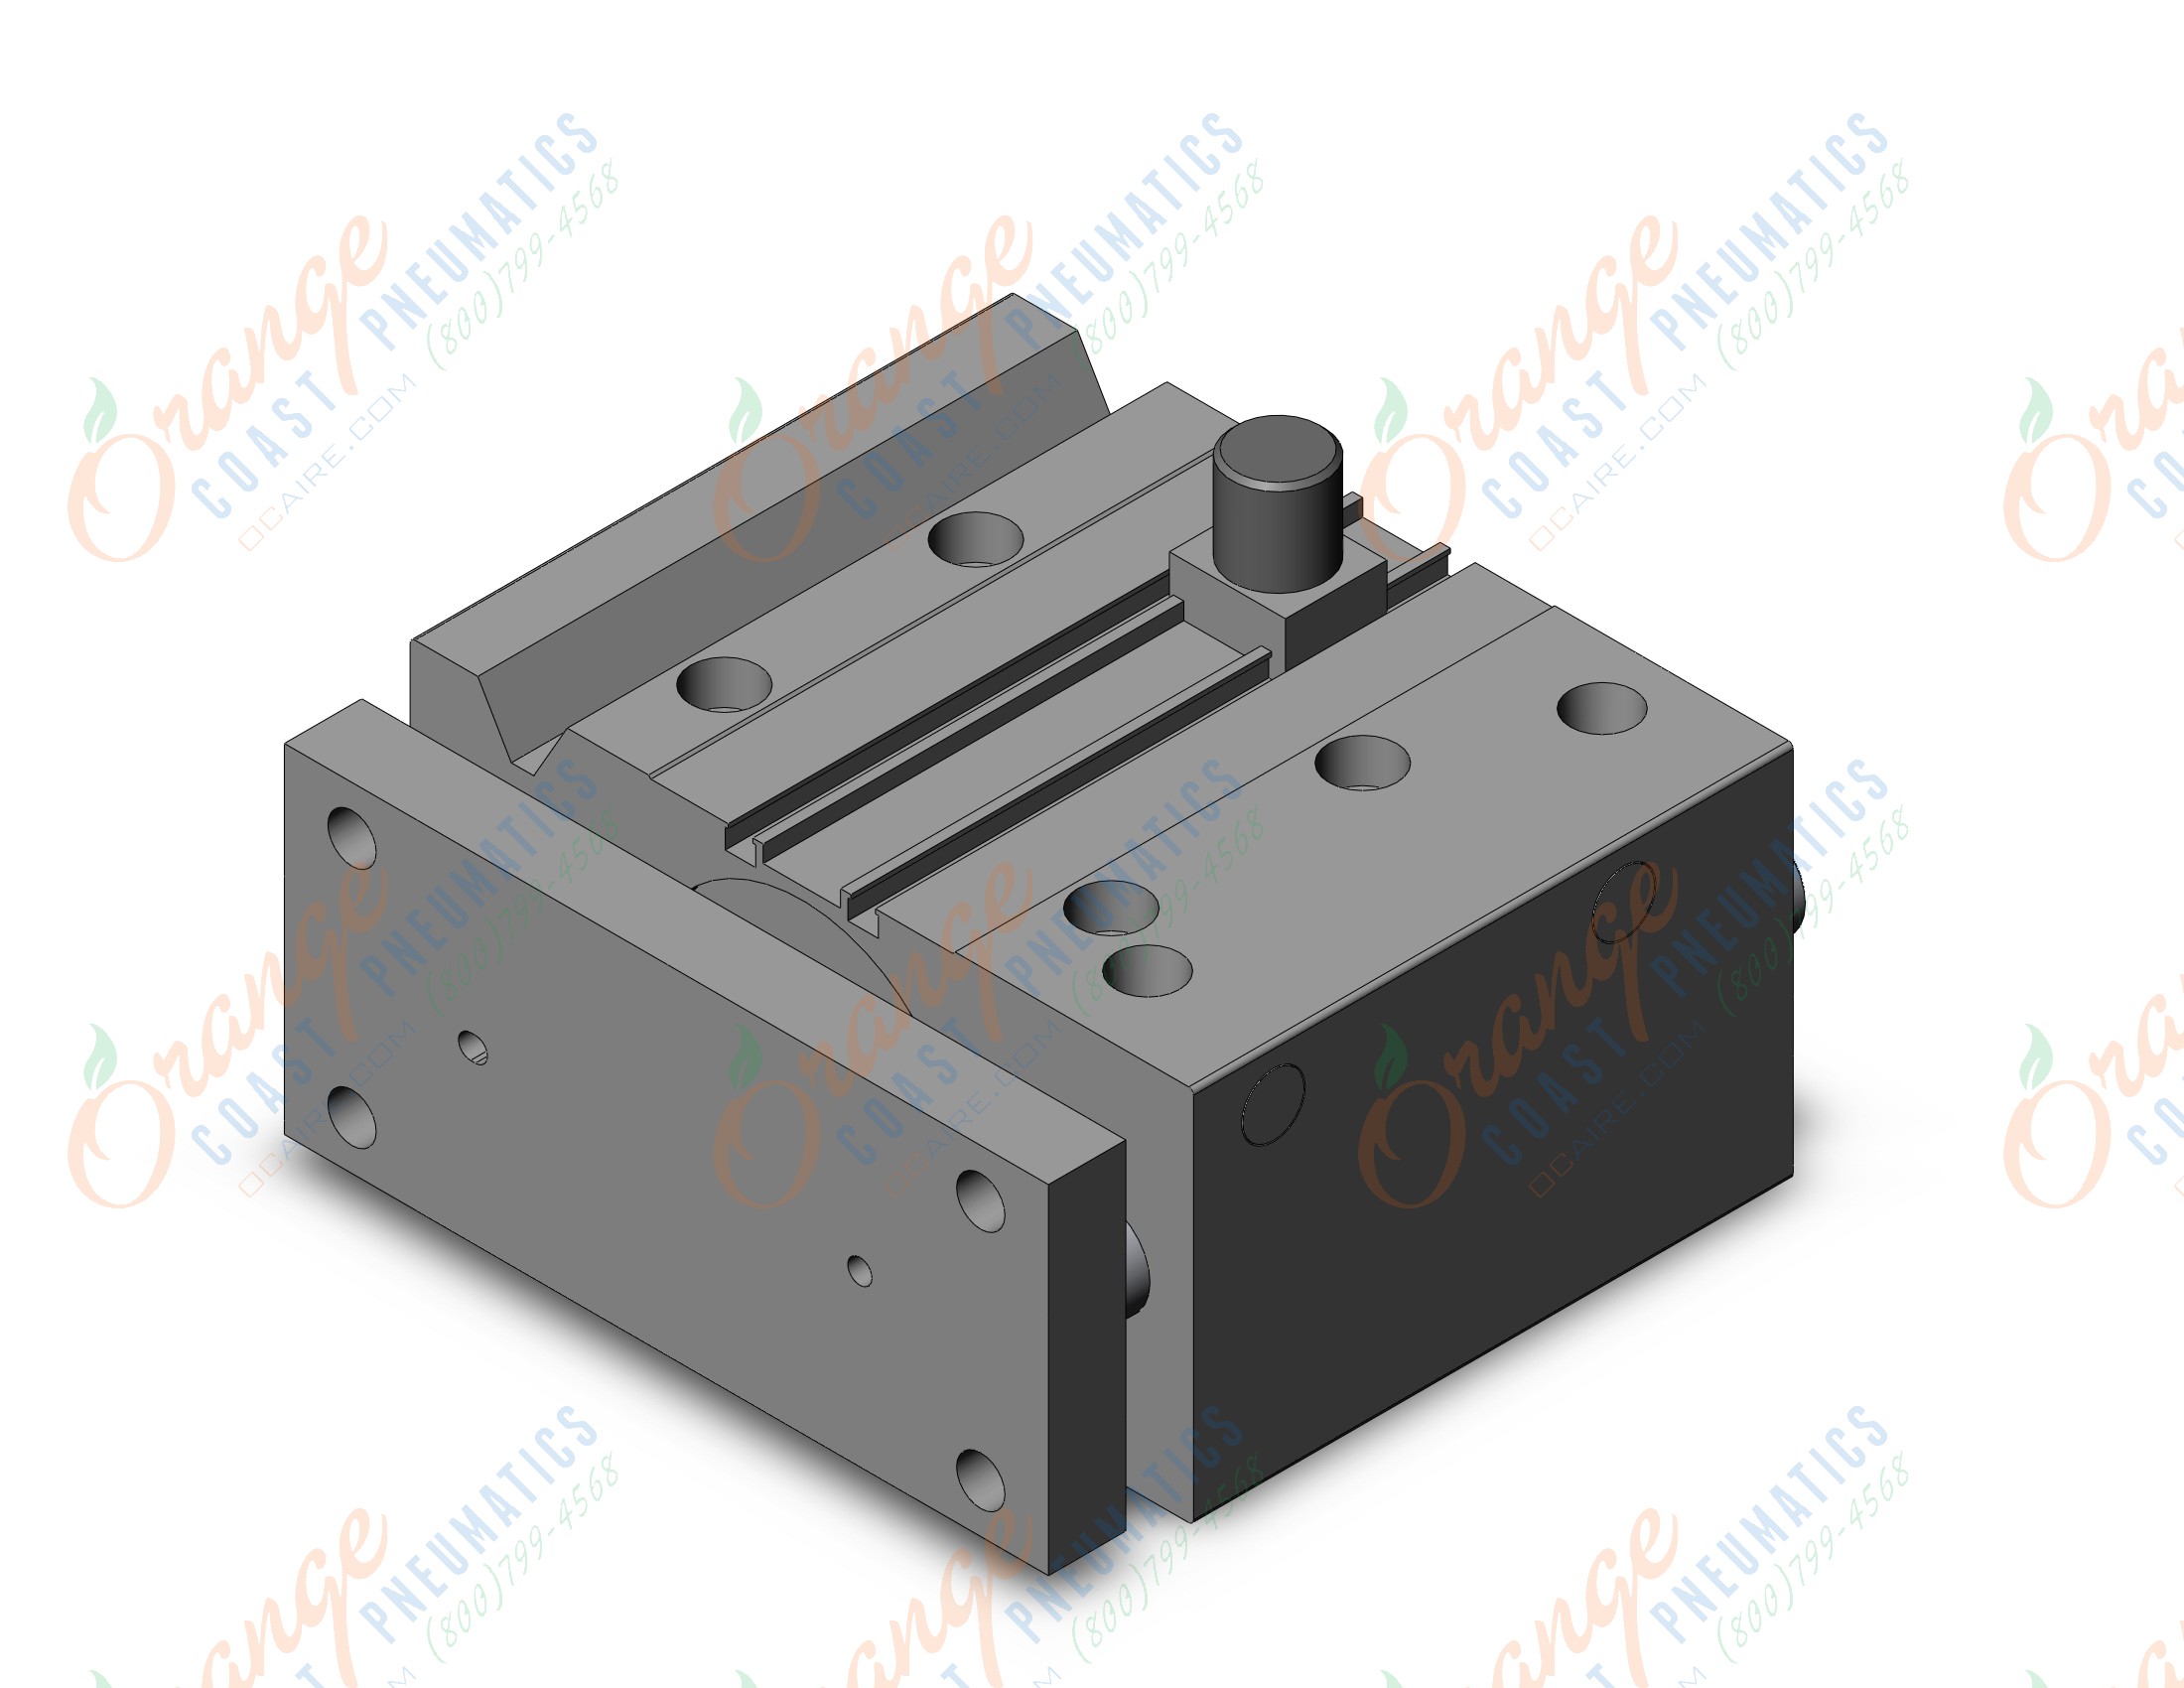 SMC MGPL63TF-50-HL mgp, compact guide cylinder, GUIDED CYLINDER